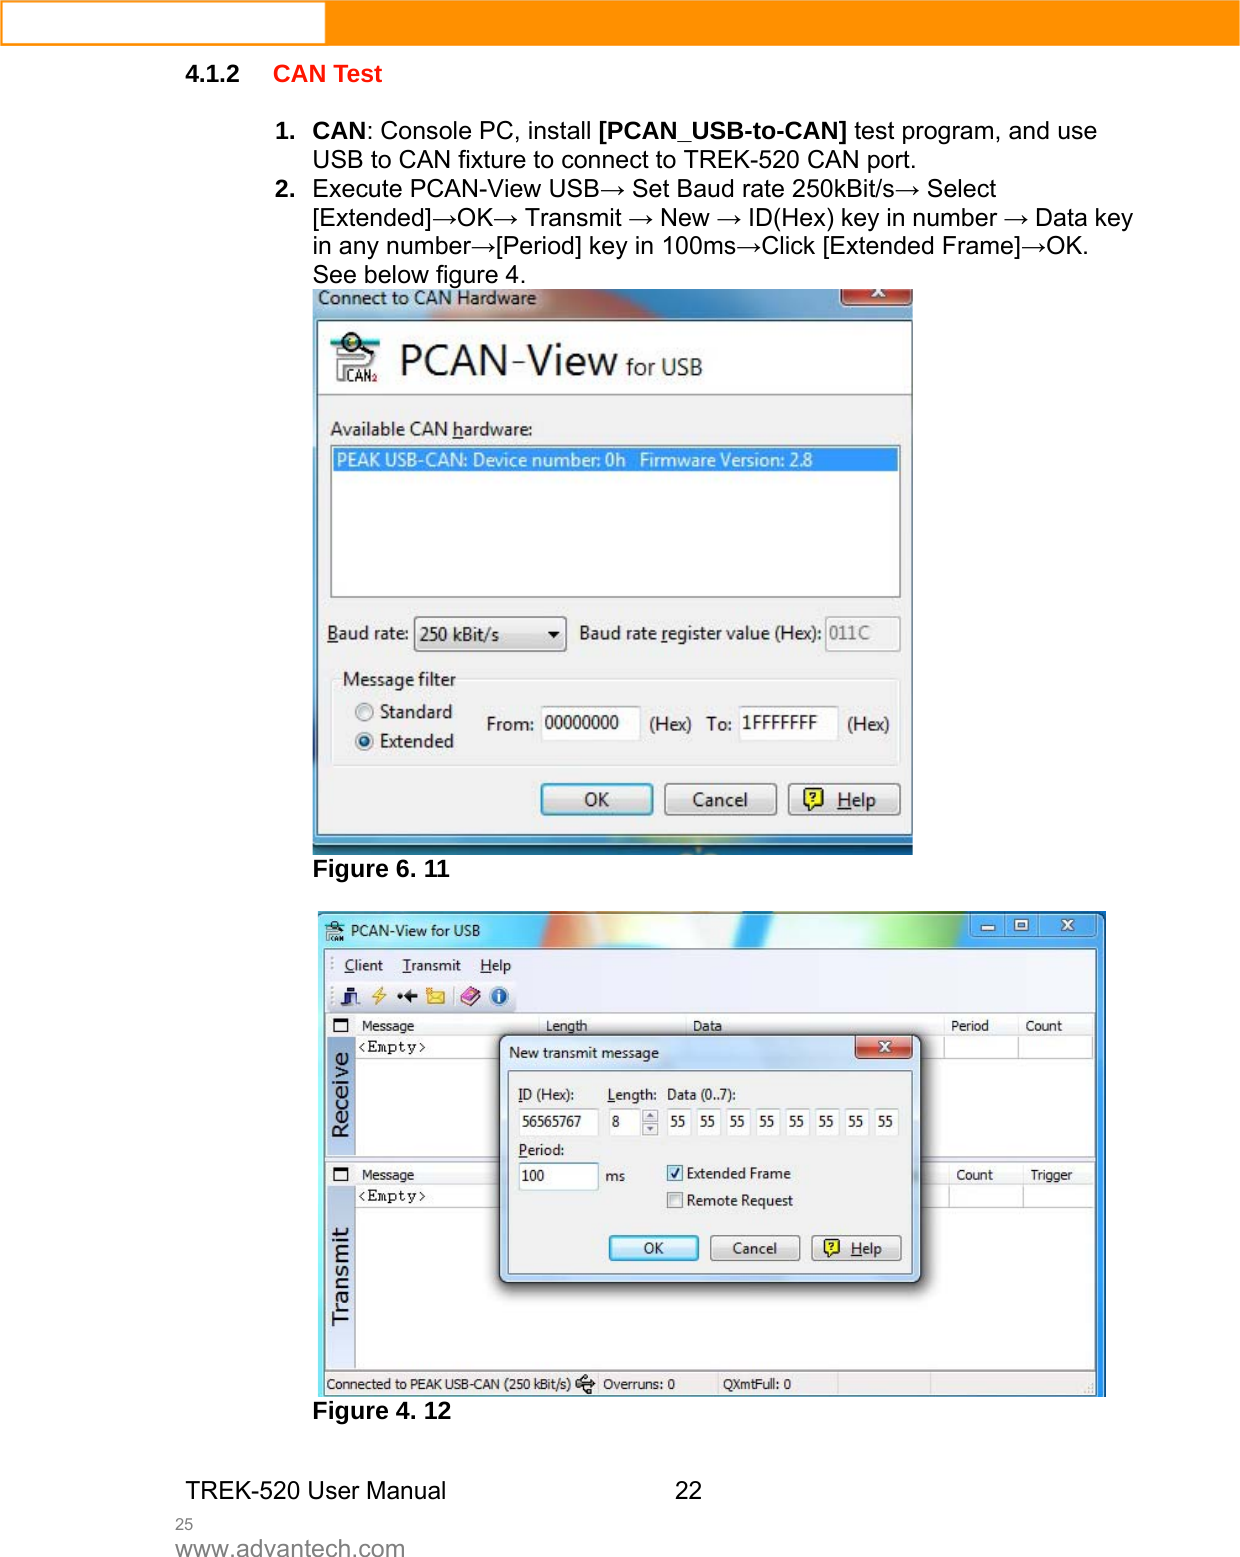  25 www.advantech.com 4.1.2 CAN Test  1. CAN: Console PC, install [PCAN_USB-to-CAN] test program, and use USB to CAN fixture to connect to TREK-520 CAN port.   2.  Execute PCAN-View USB→ Set Baud rate 250kBit/s→ Select [Extended]→OK→ Transmit → New → ID(Hex) key in number → Data key in any number→[Period] key in 100ms→Click [Extended Frame]→OK. See below figure 4.    Figure 6. 11   Figure 4. 12   TREK-520 User Manual 22 